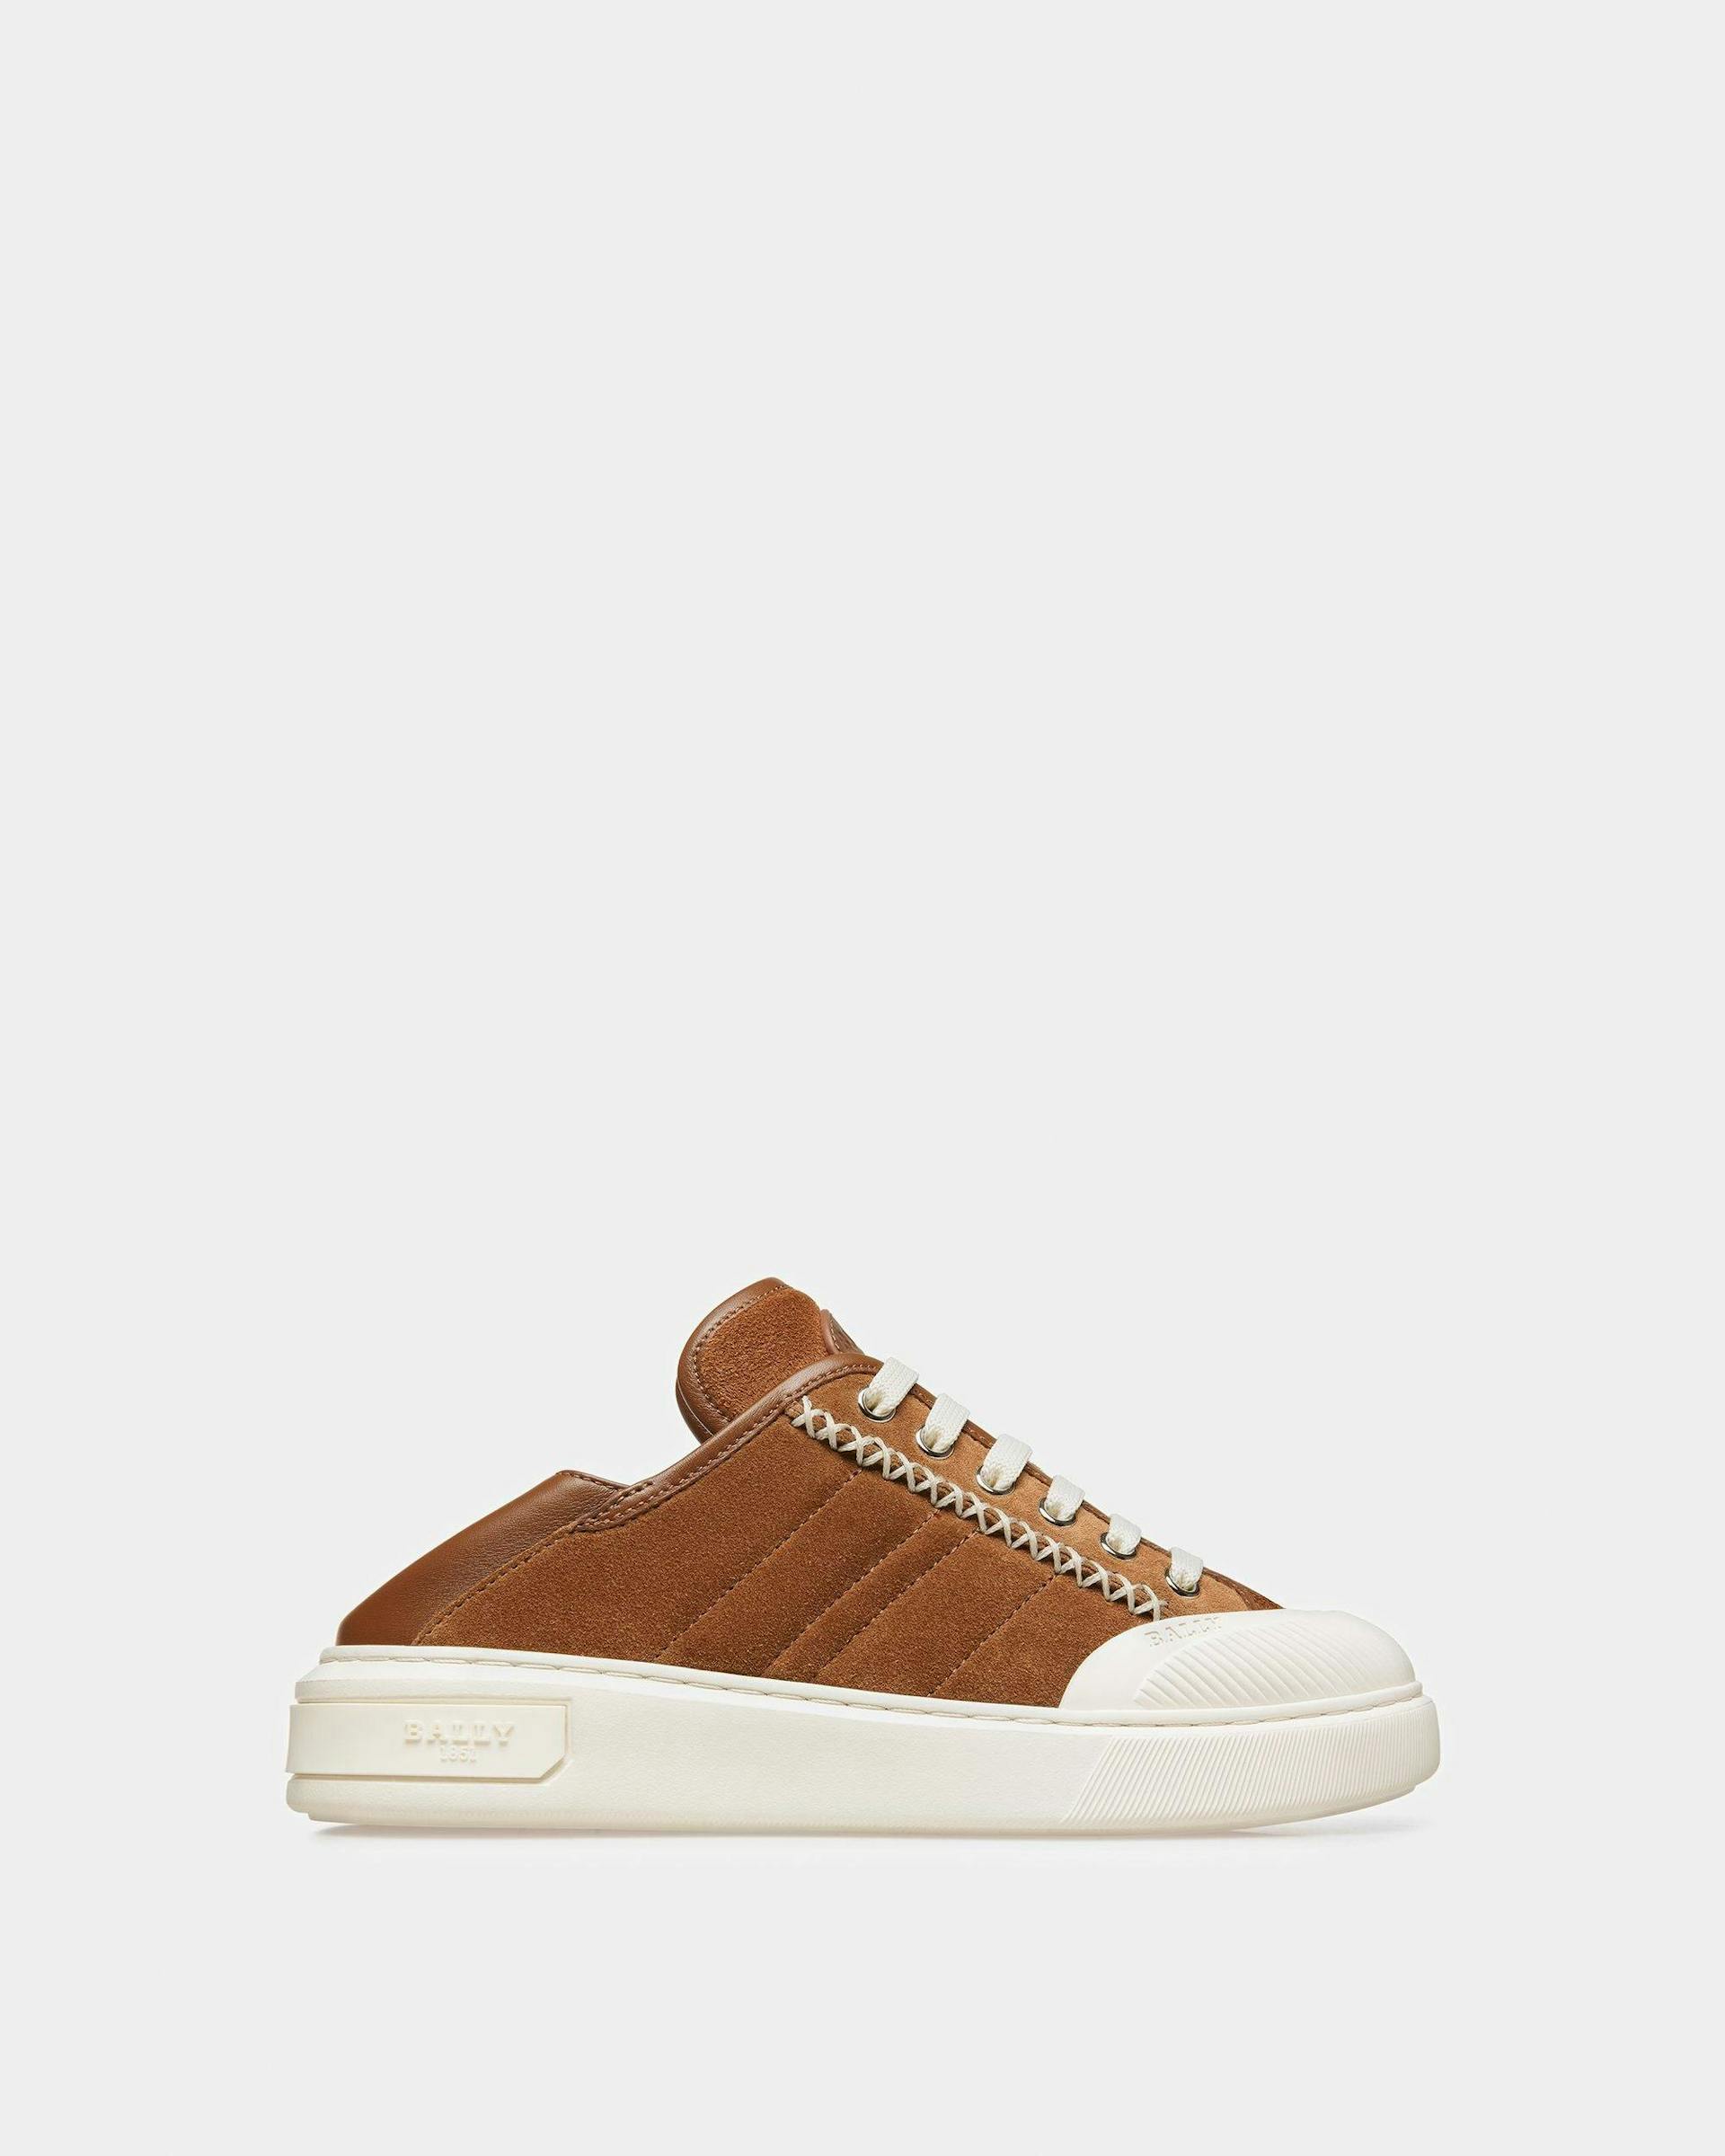 Marily Suede Sneakers In Brown - Women's - Bally - 08